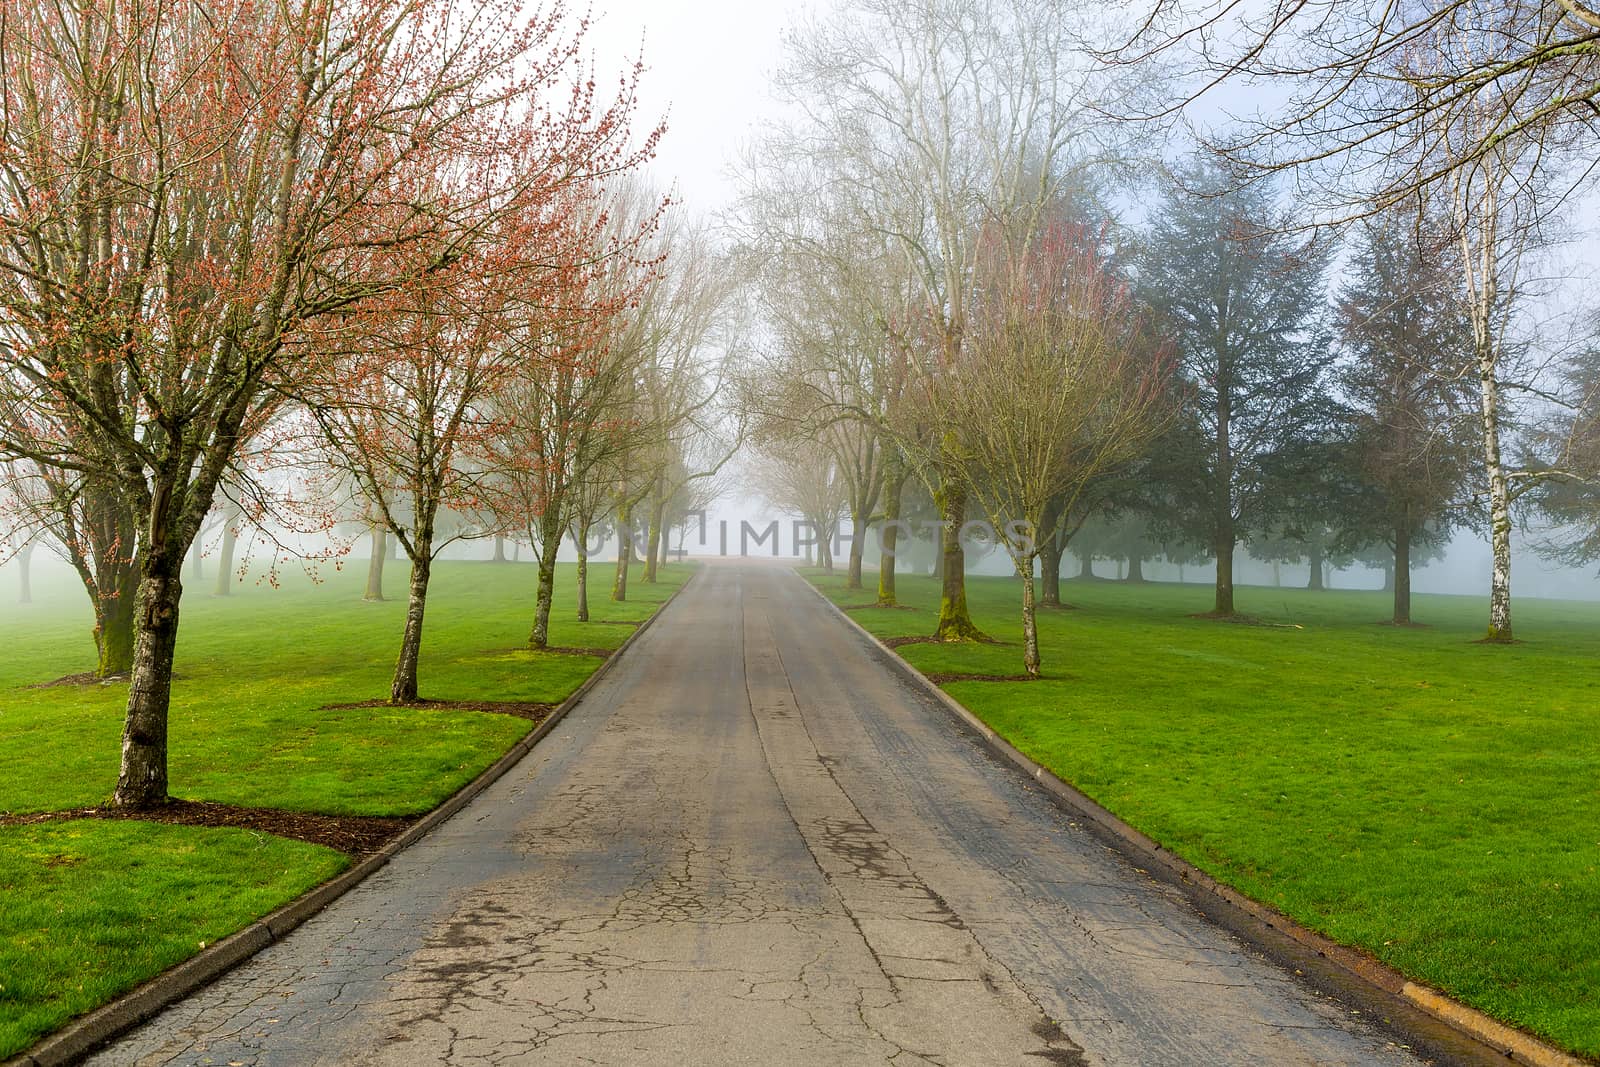 Foggy Morning at the Park by Davidgn